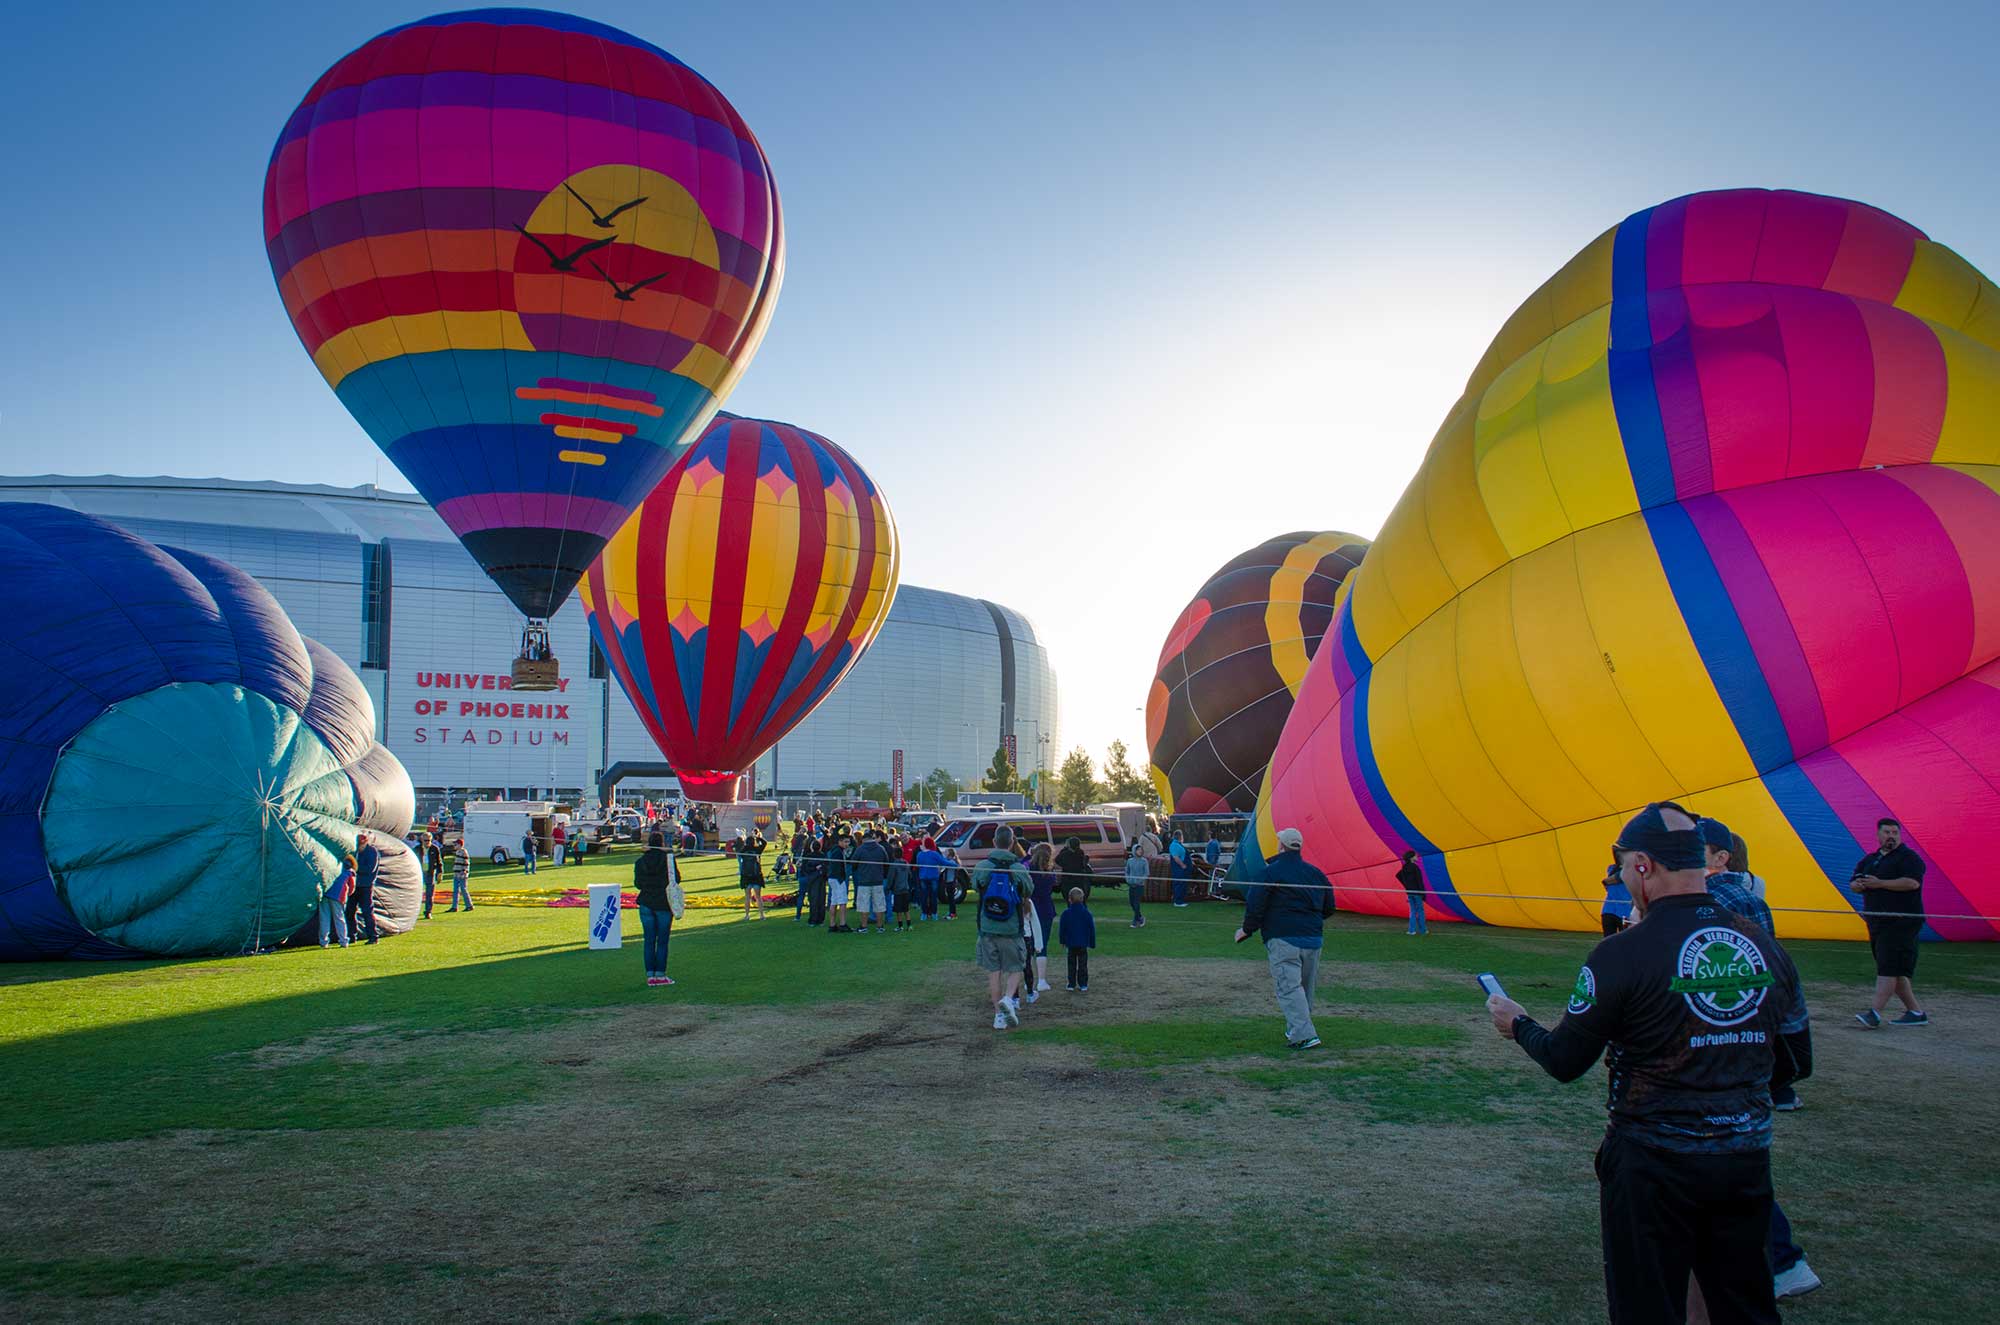 The Out West Balloon Fest 2017